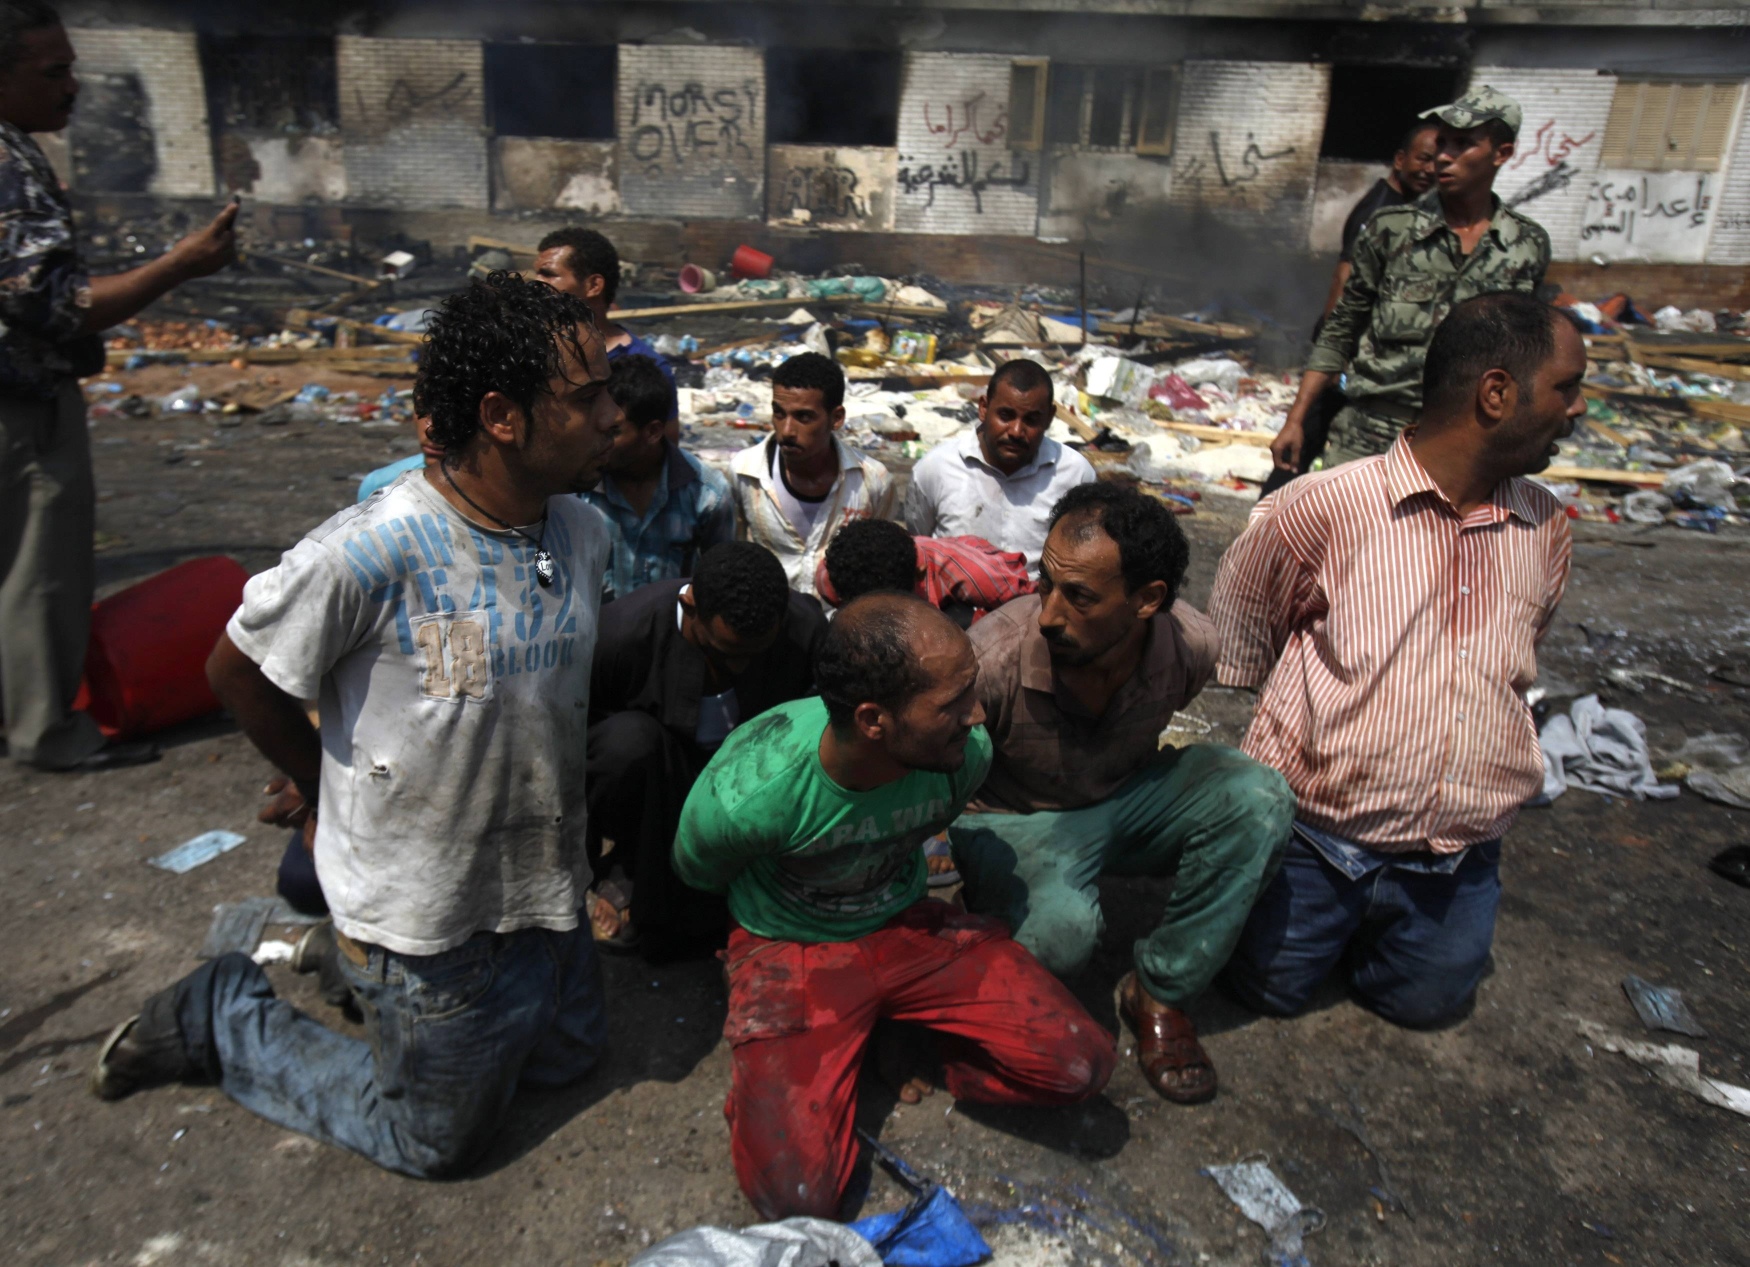 Suspects are rounded up near a burnt annex building at the Rabaa Adawiya mosque in Cairo. Photo: Reuters